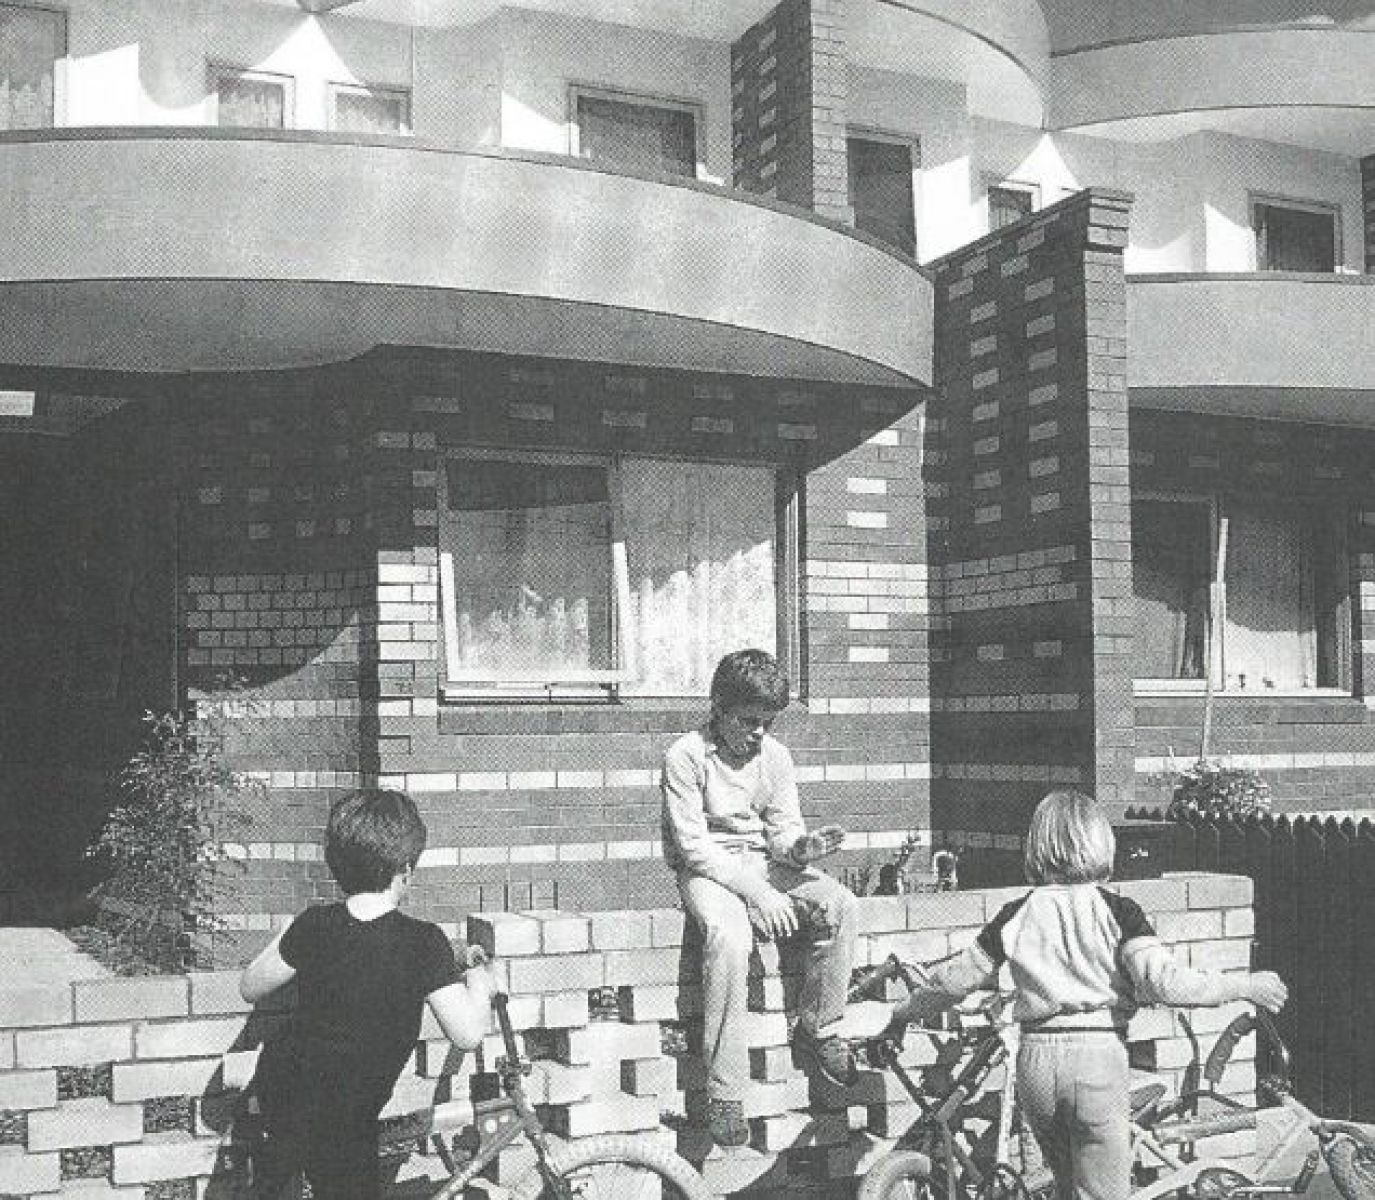 Image shows image taken at Kay Street Infill housing, Carlton. Is a black and white image with children standing out the front of the building with their bikes.